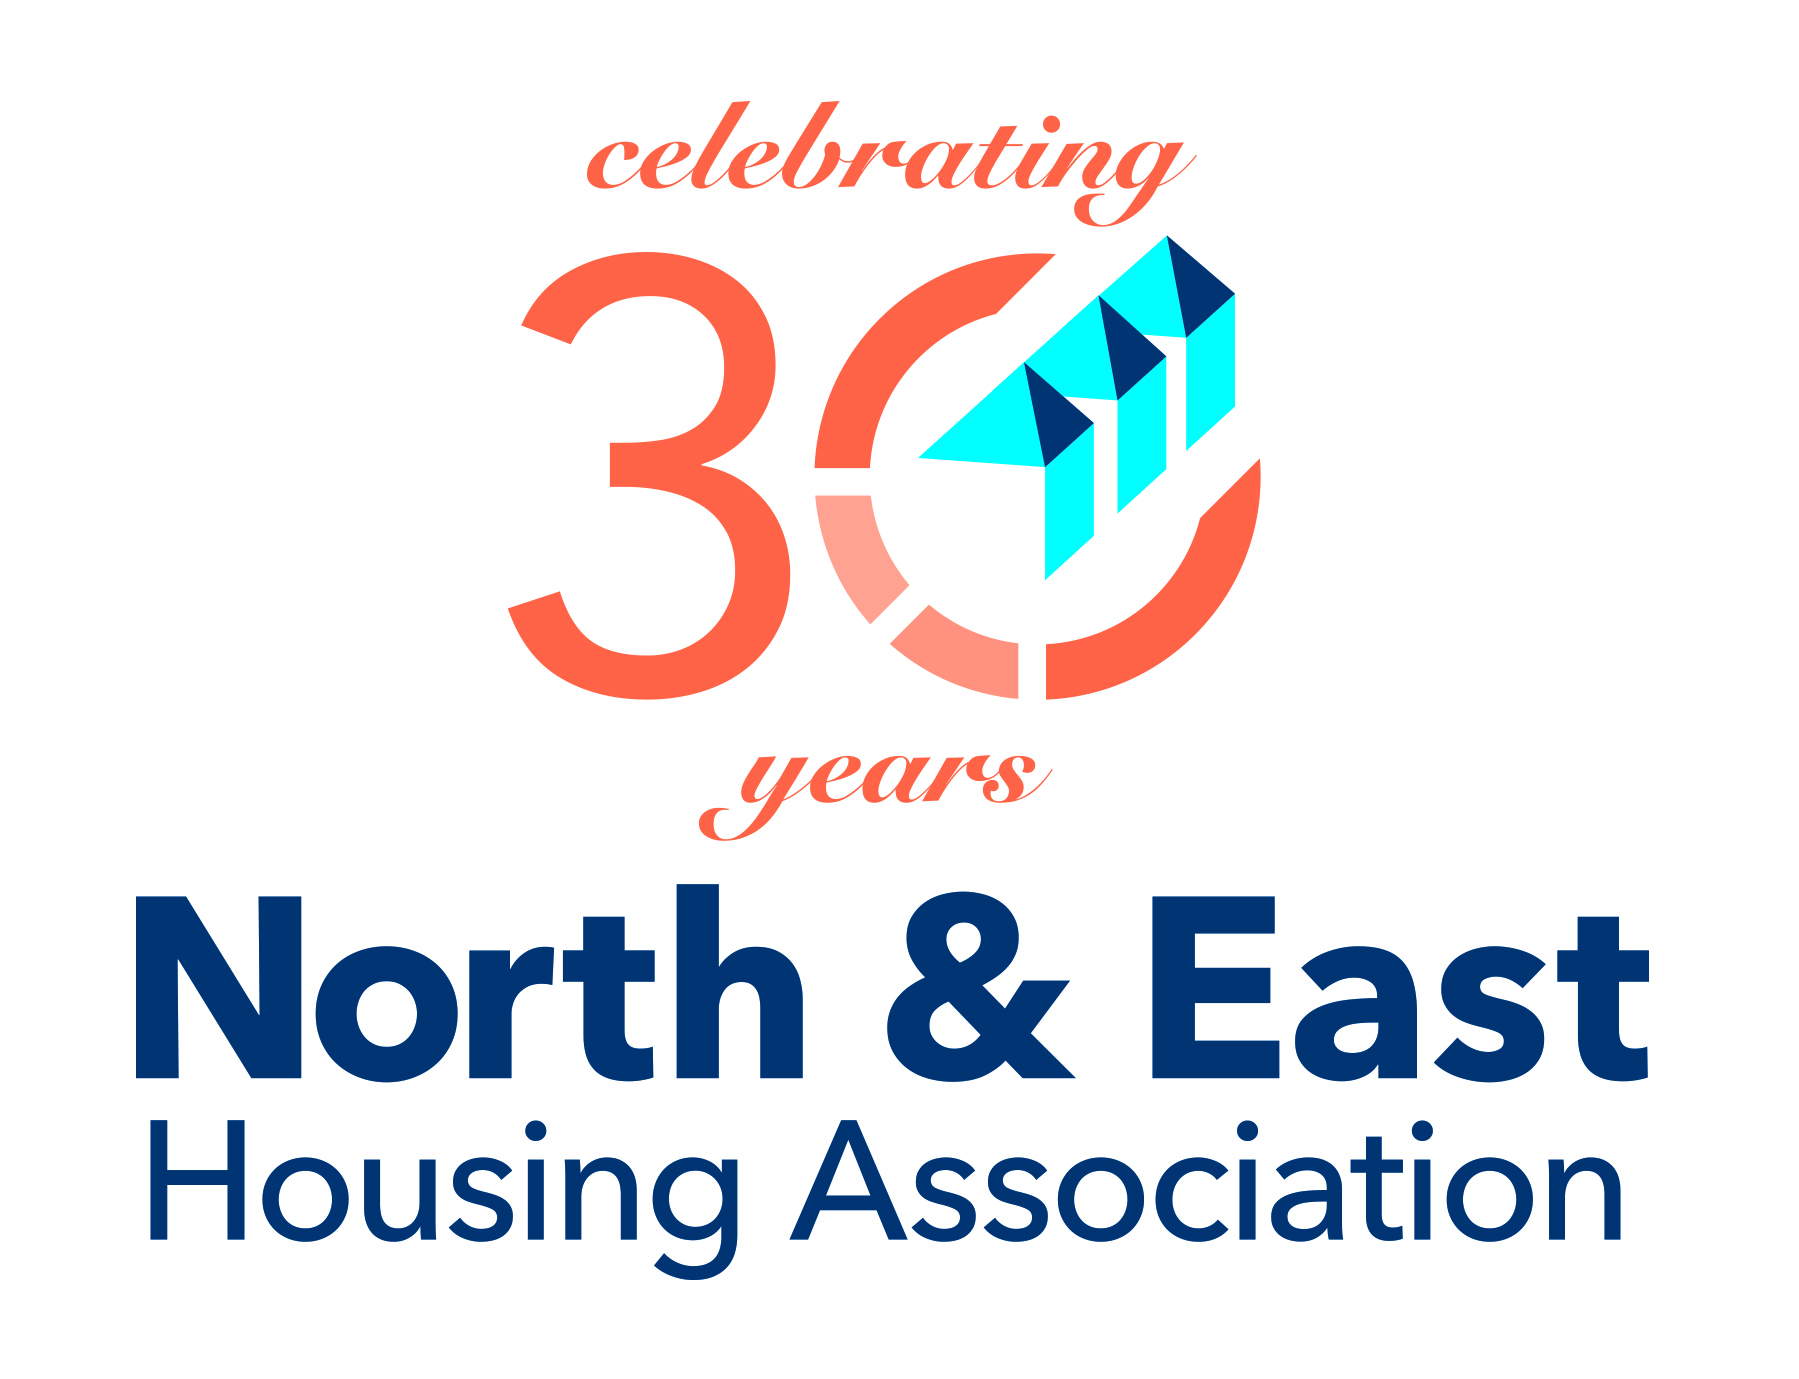 Celebrating 30 Years North & East Housing Association 